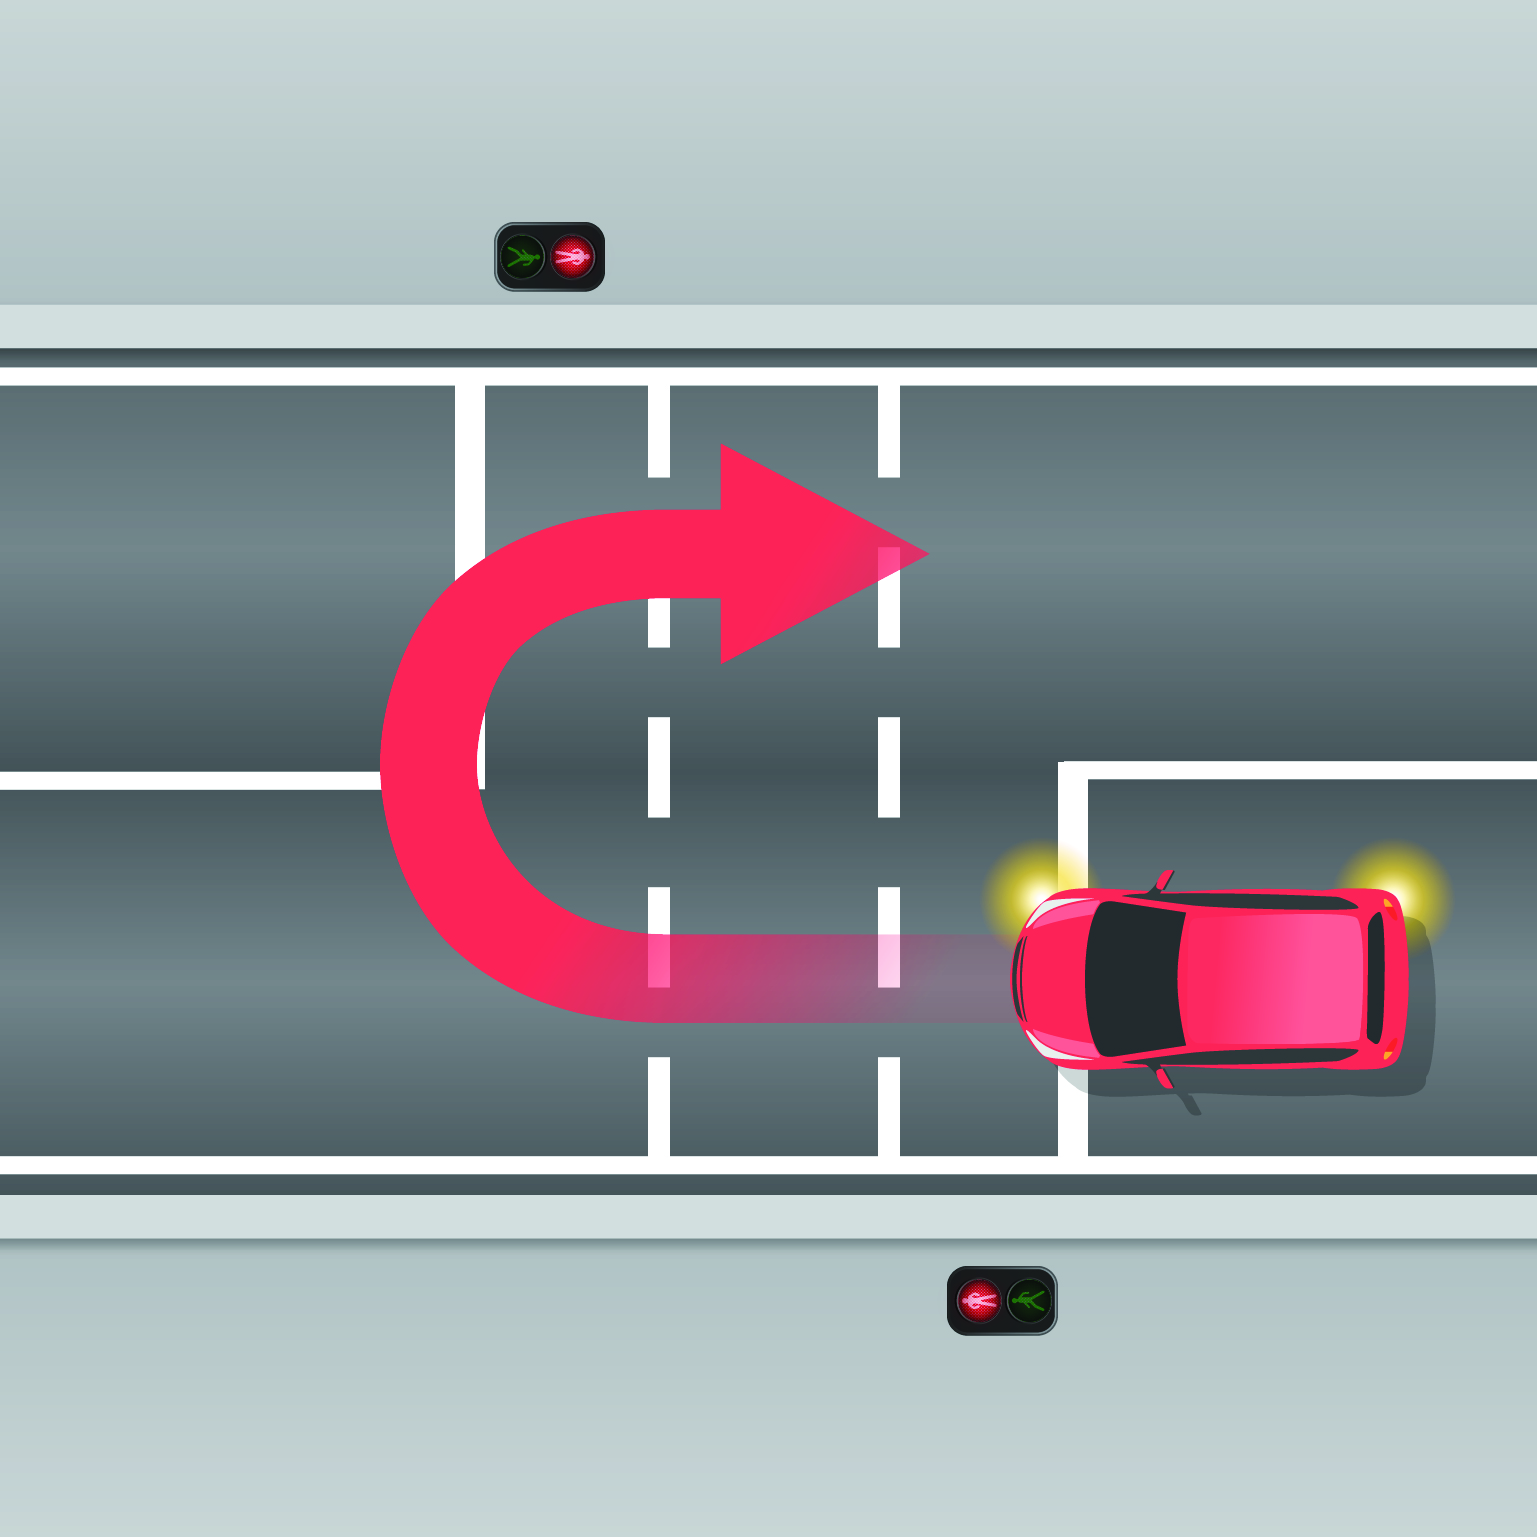 A car making a U-turn at a marked foot crossing, going back the same direction it came from